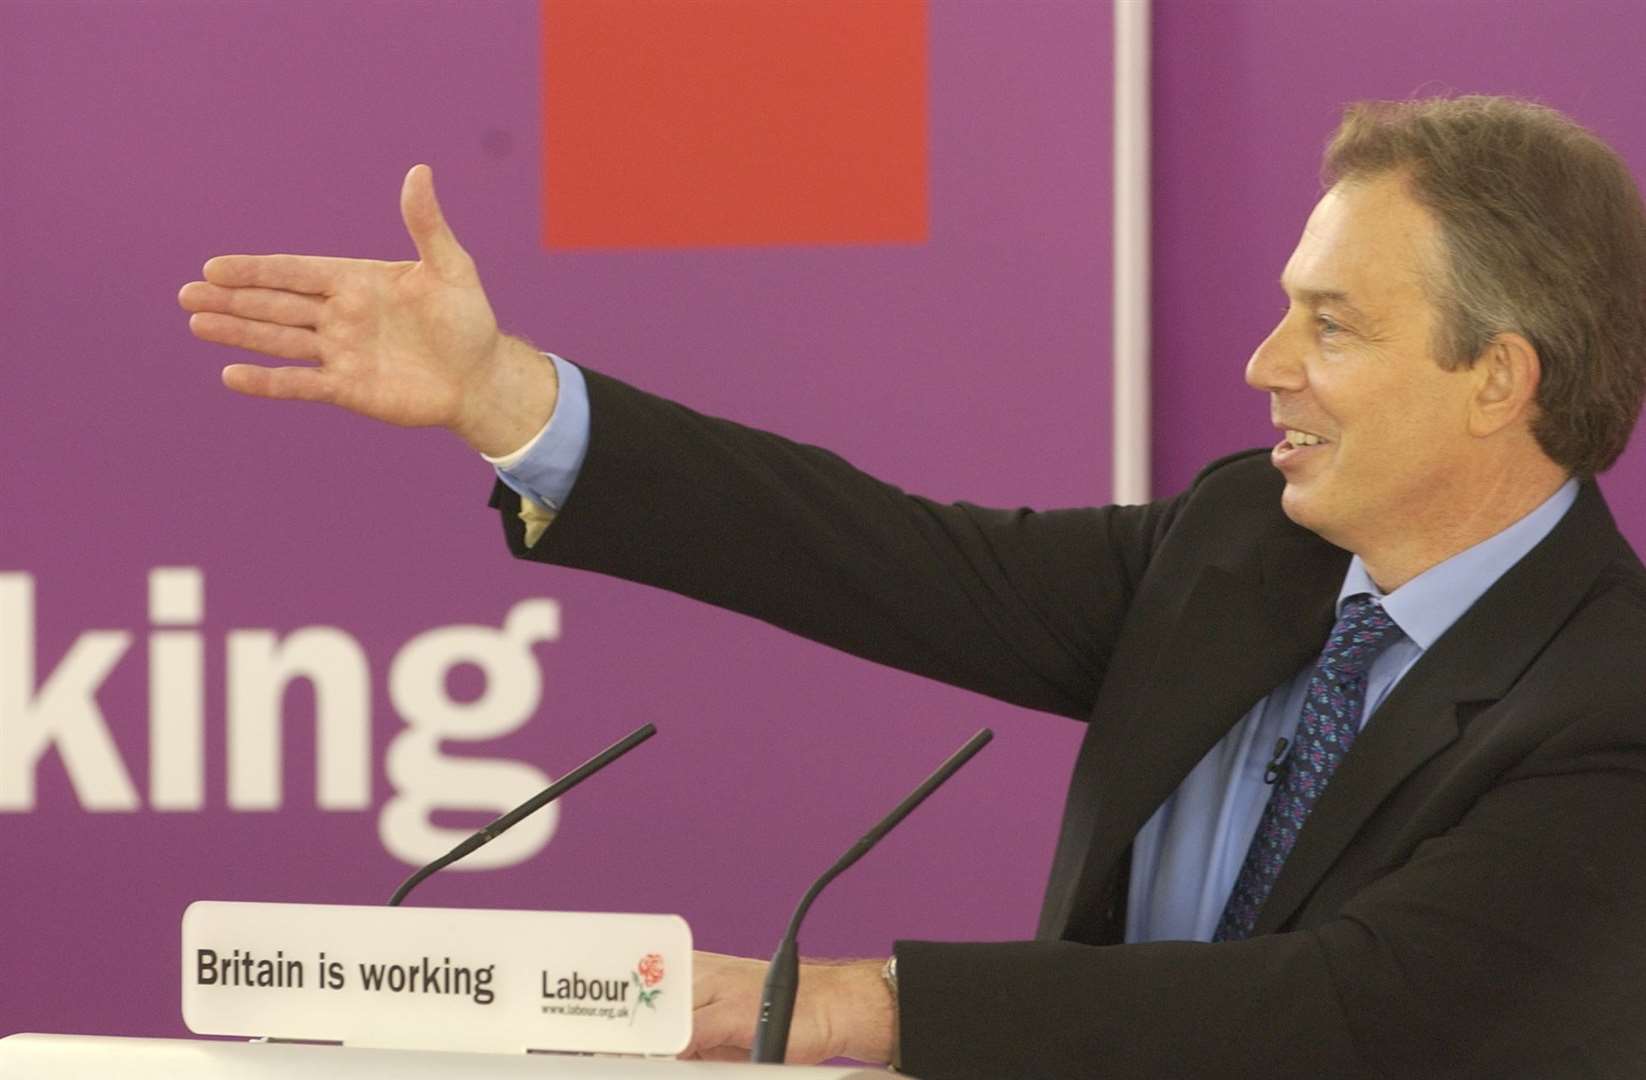 Tony Blair delivers his speech at the St Mary's island community centre in 2005